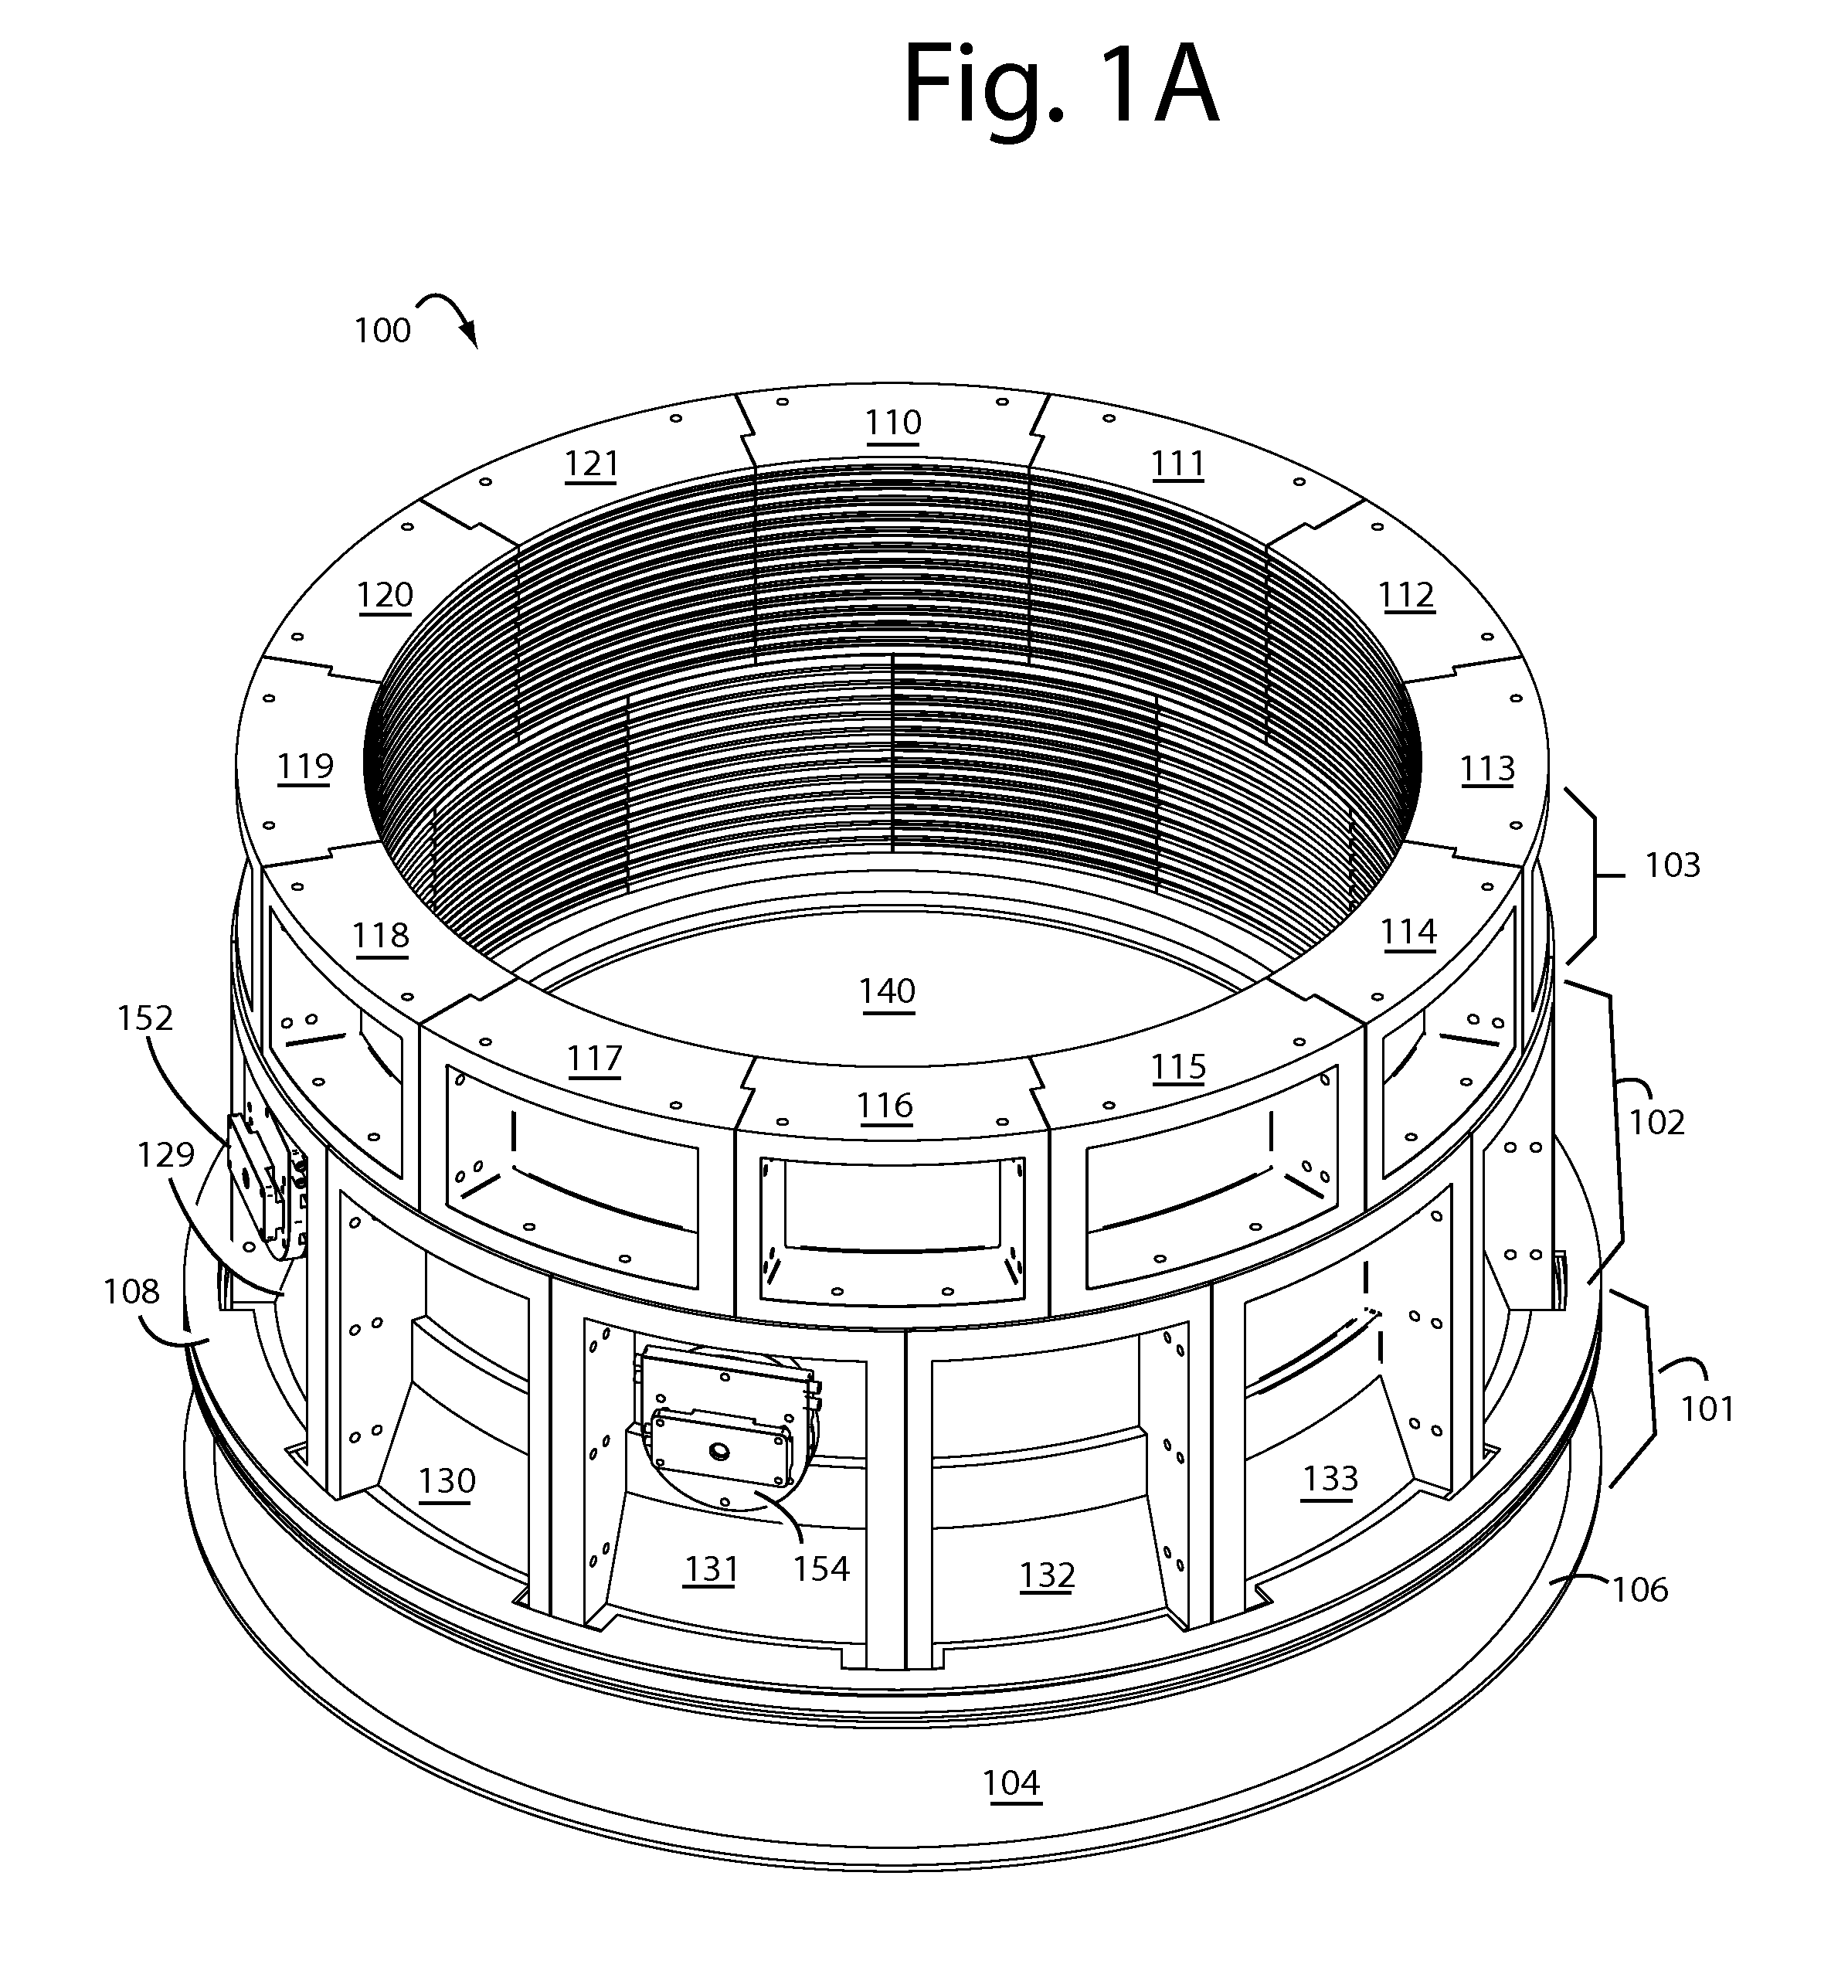 Elastically interconnected cooler compressed hearth and walls